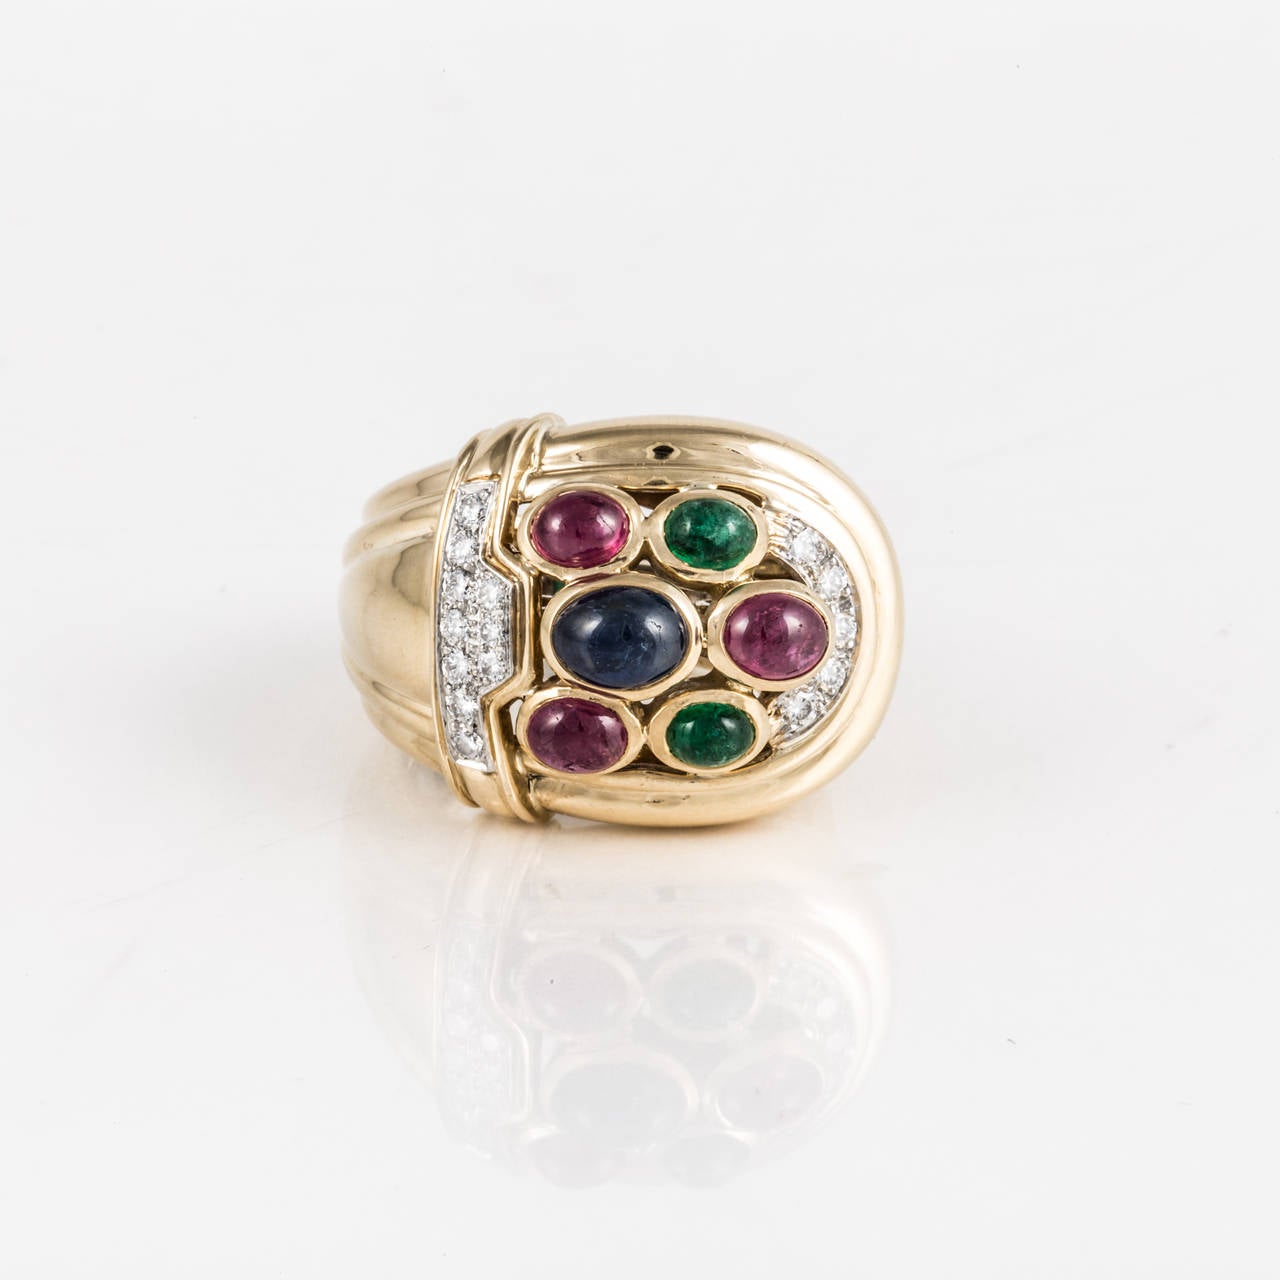 David Webb ring composed of 18K yellow gold with cabochon rubies, emeralds, a sapphire and round diamonds. There are fifteen round diamonds that total 0.35 carats, F-G color and VS clarity.  The ring is marked 